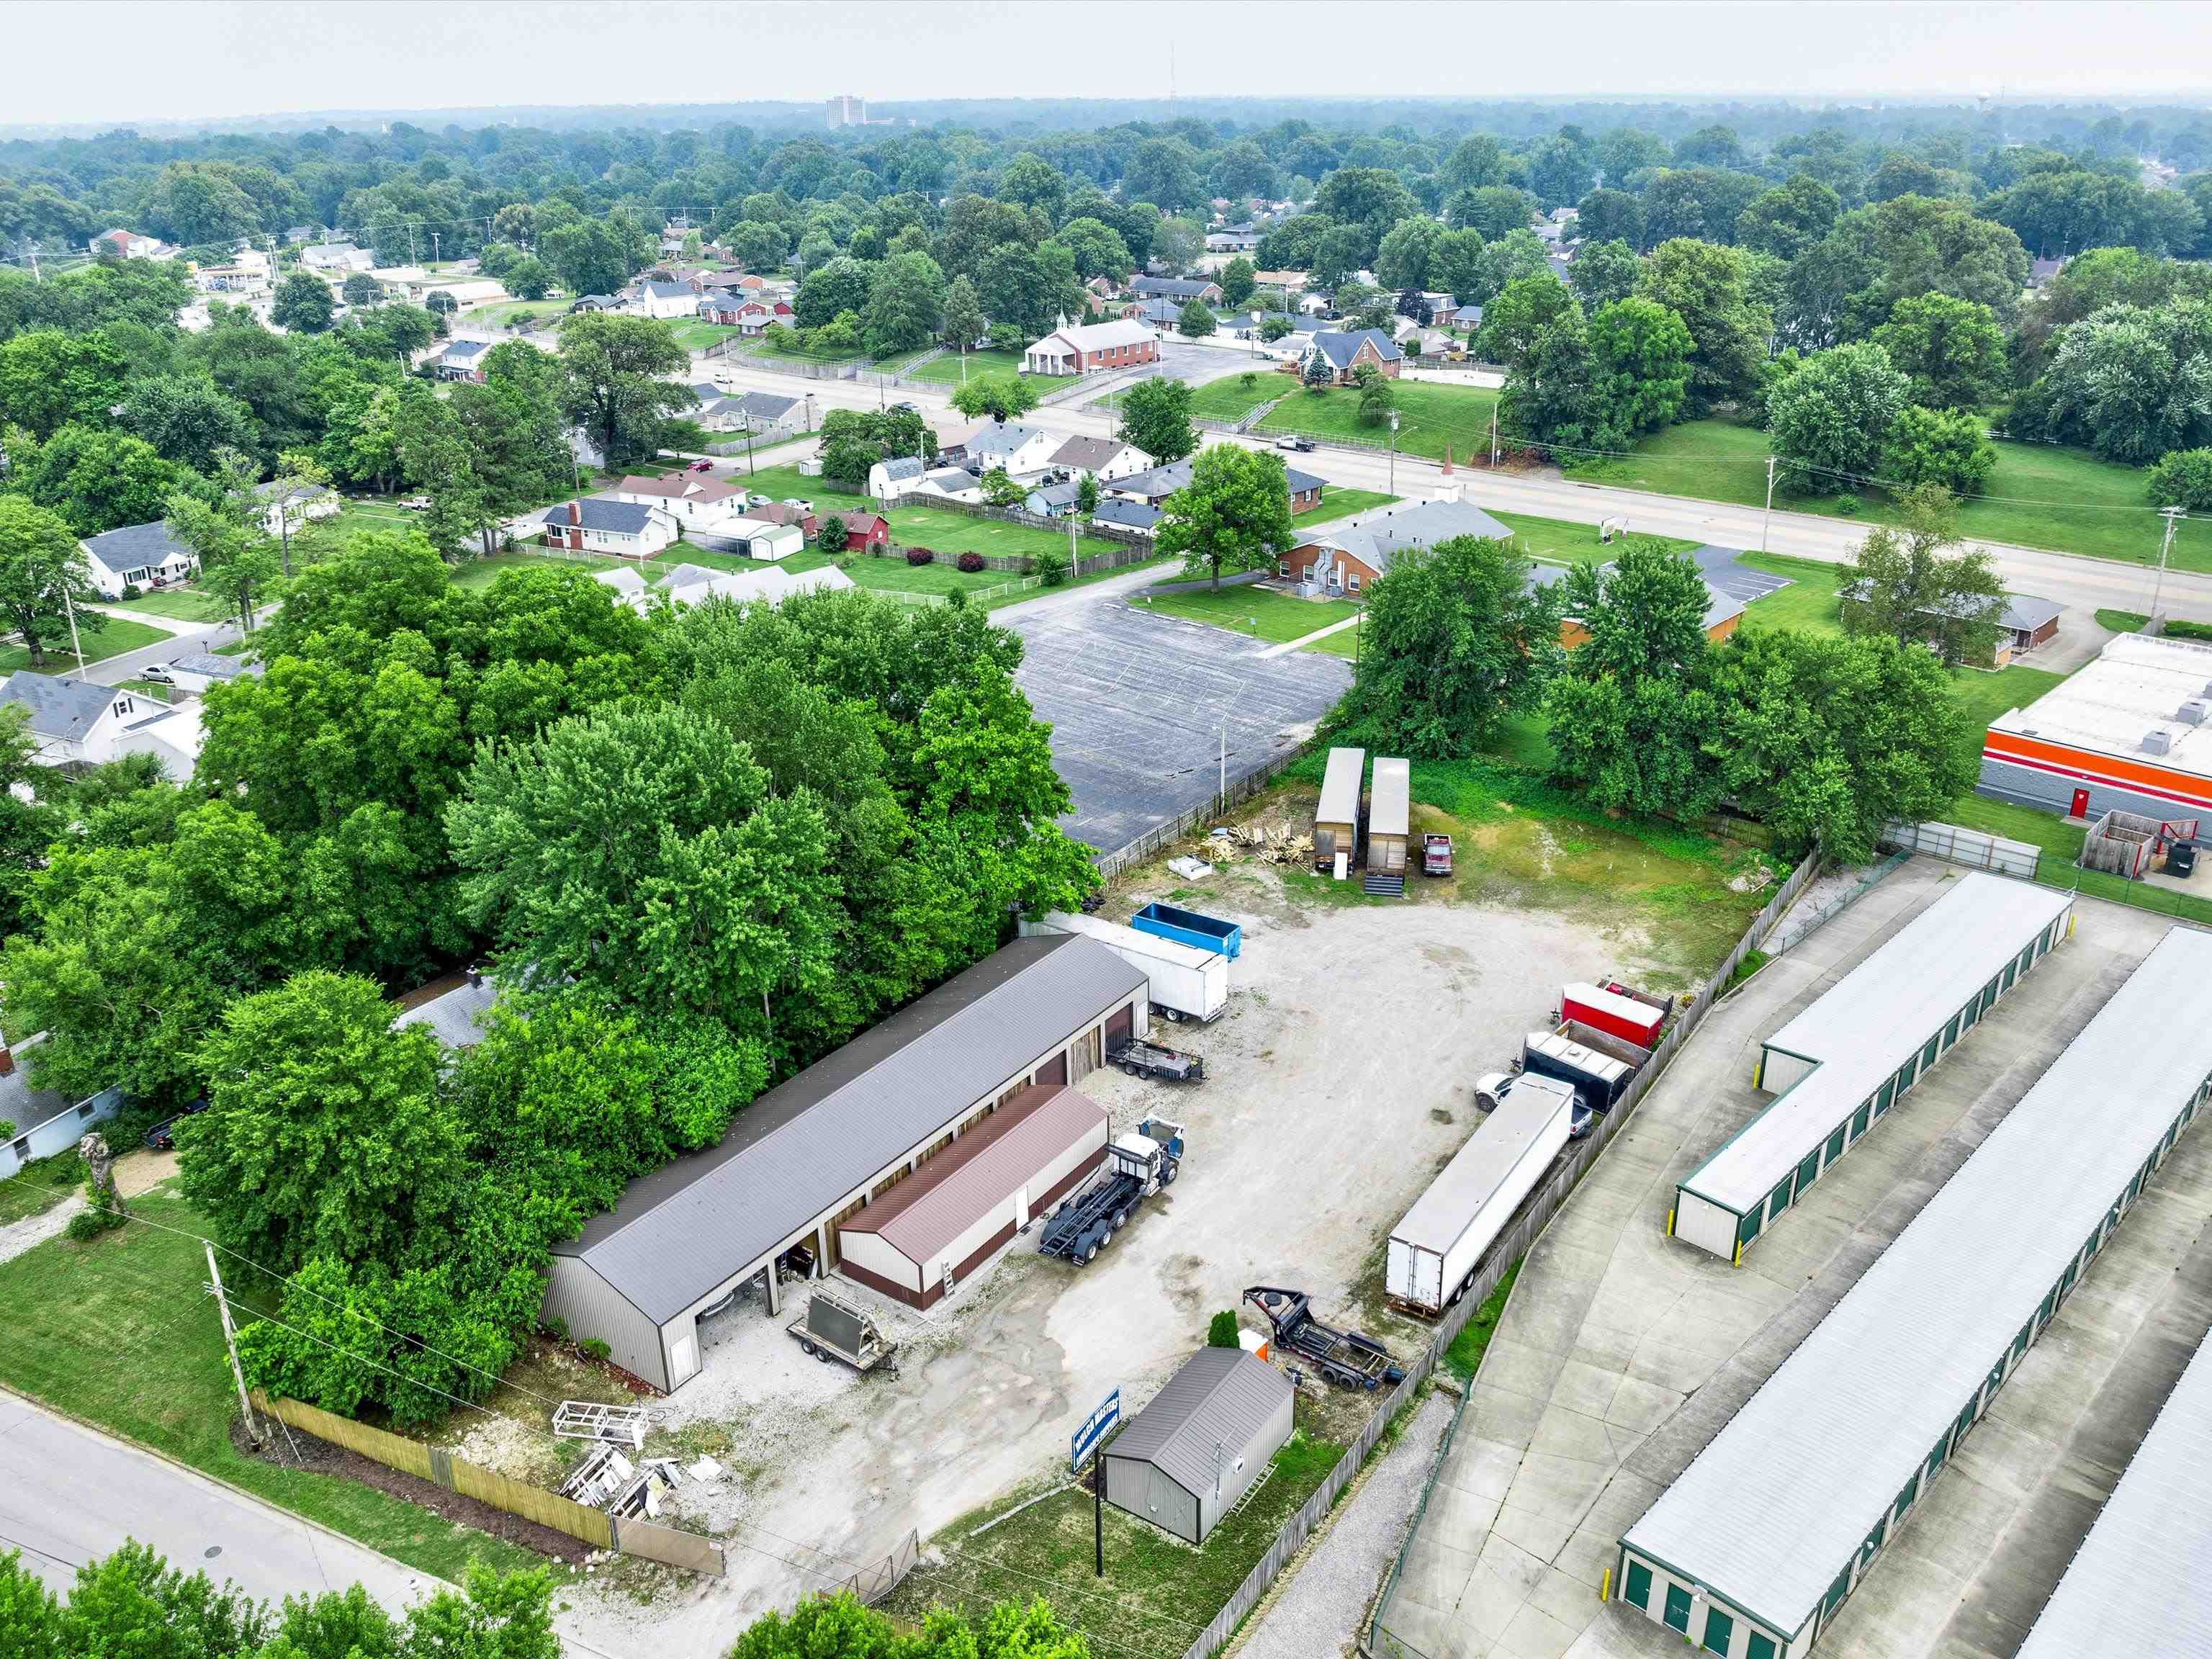 2412 Old Henderson Rd., Owensboro, Kentucky 42301, ,Commercial Land,For Sale,Old Henderson Rd.,88627